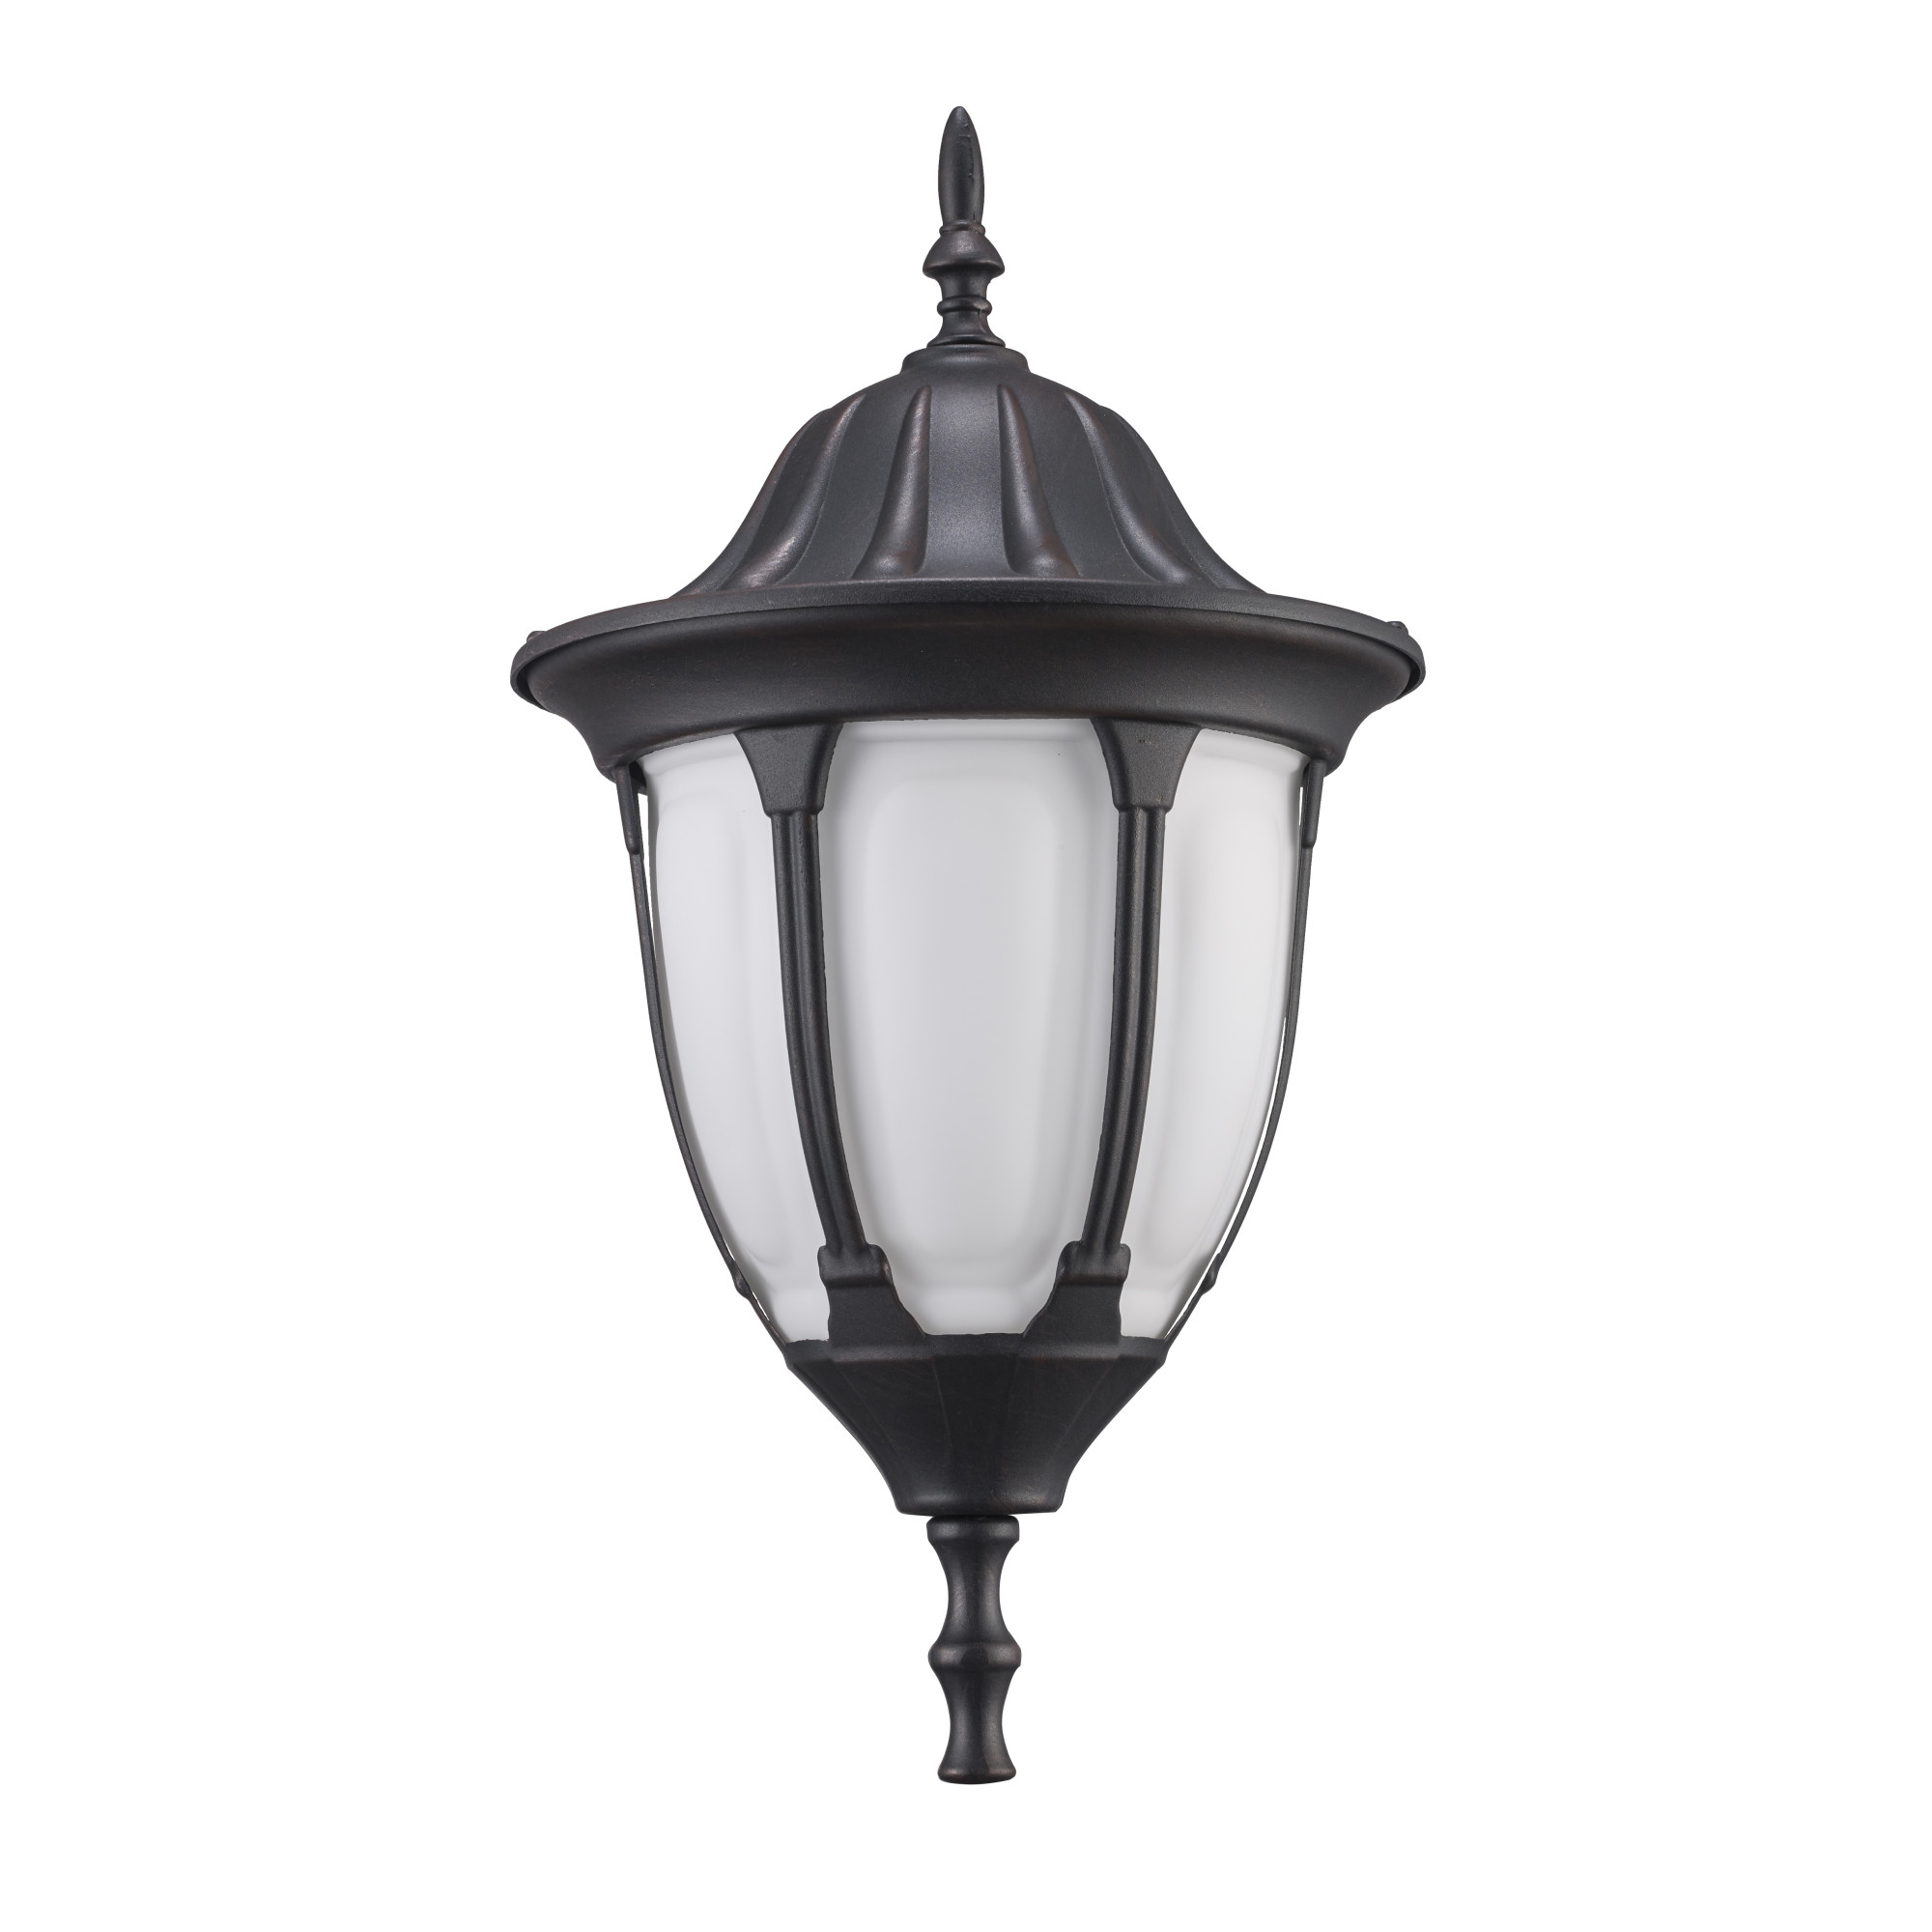 Trans Globe Lighting 4040 1 Light Up Lighting Outdoor Small Wall Sconce From The Outdoor - image 5 of 5